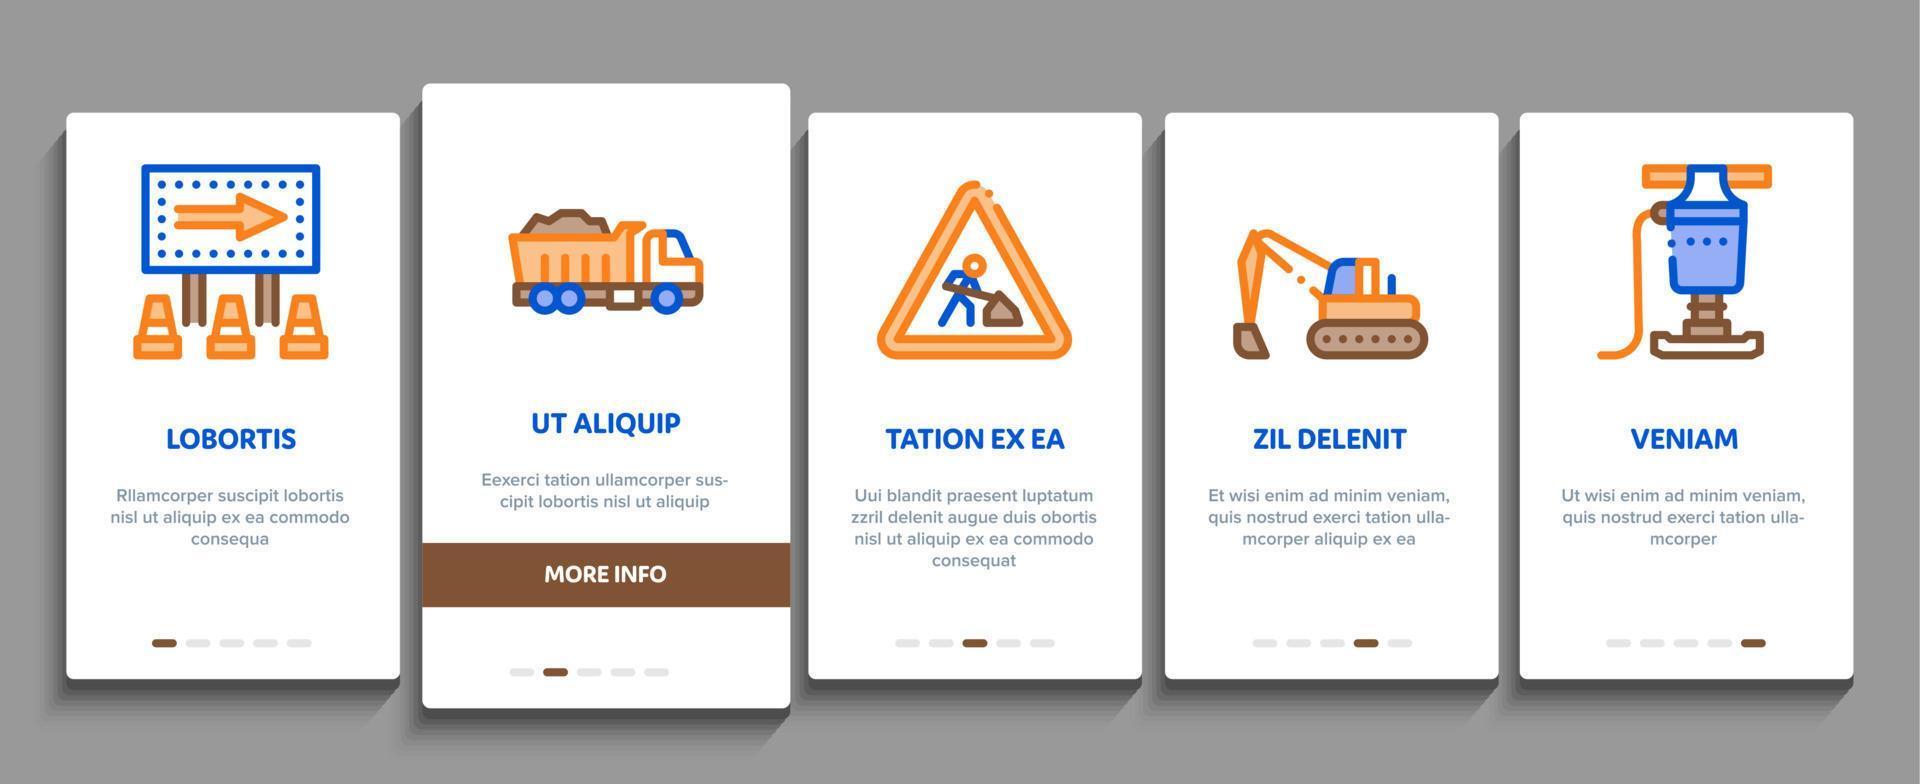 Road Repair And Construction Onboarding Elements Icons Set Vector